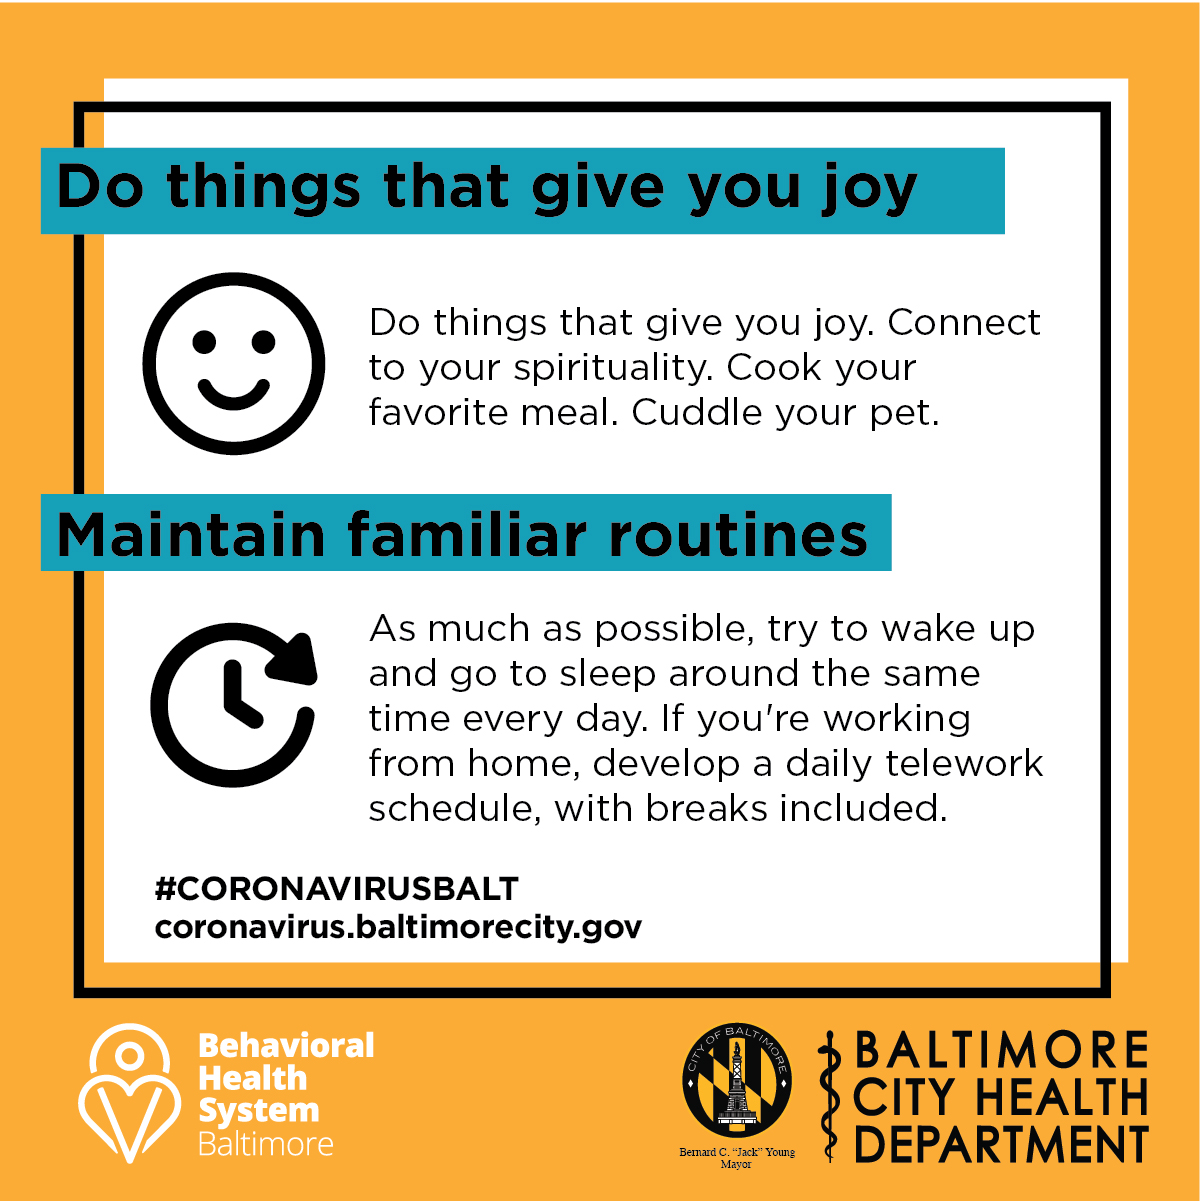 Do things that give you joy and maintain familiar routines. 